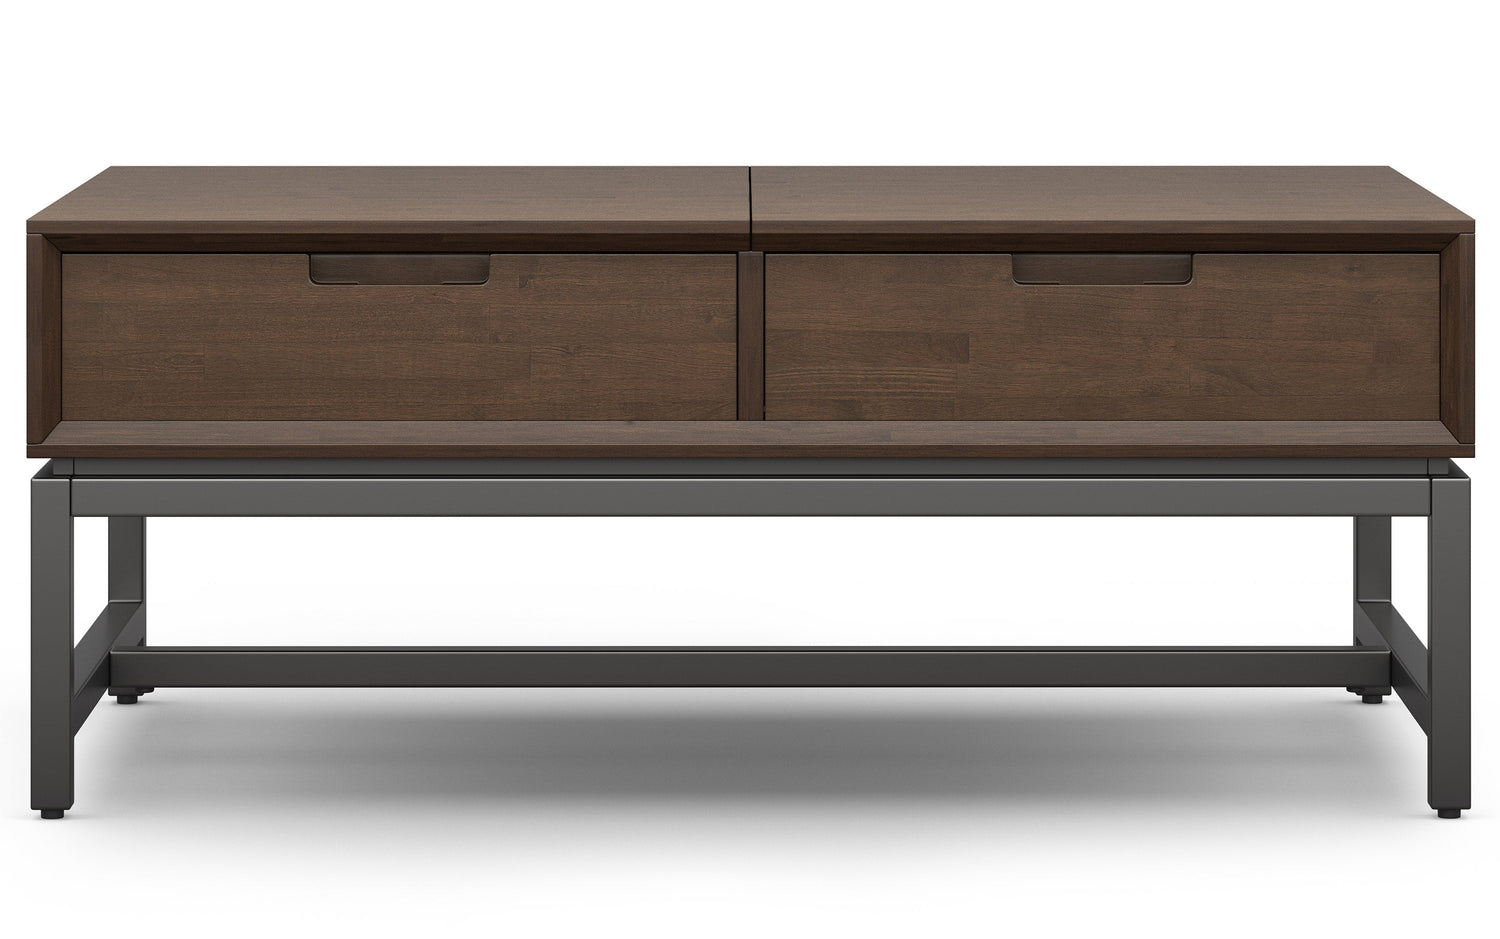 Banting Lift Top Coffee Table